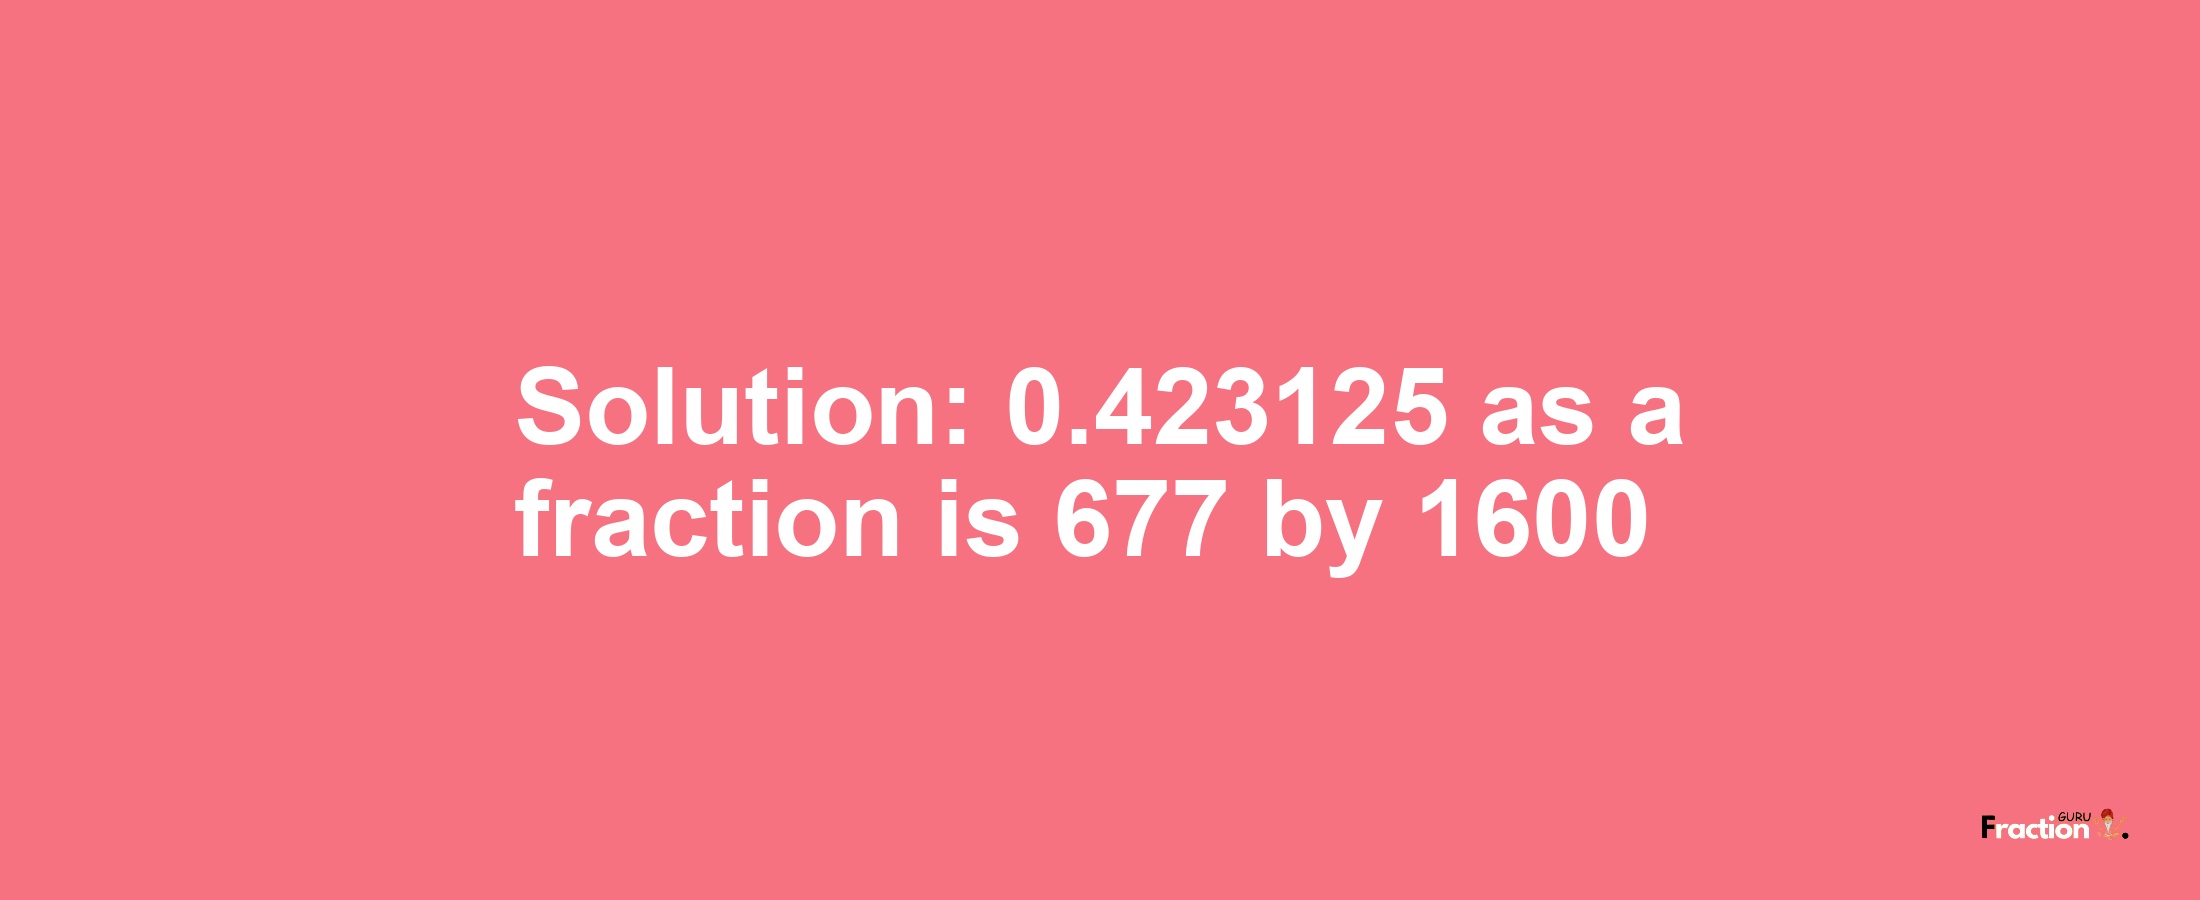 Solution:0.423125 as a fraction is 677/1600